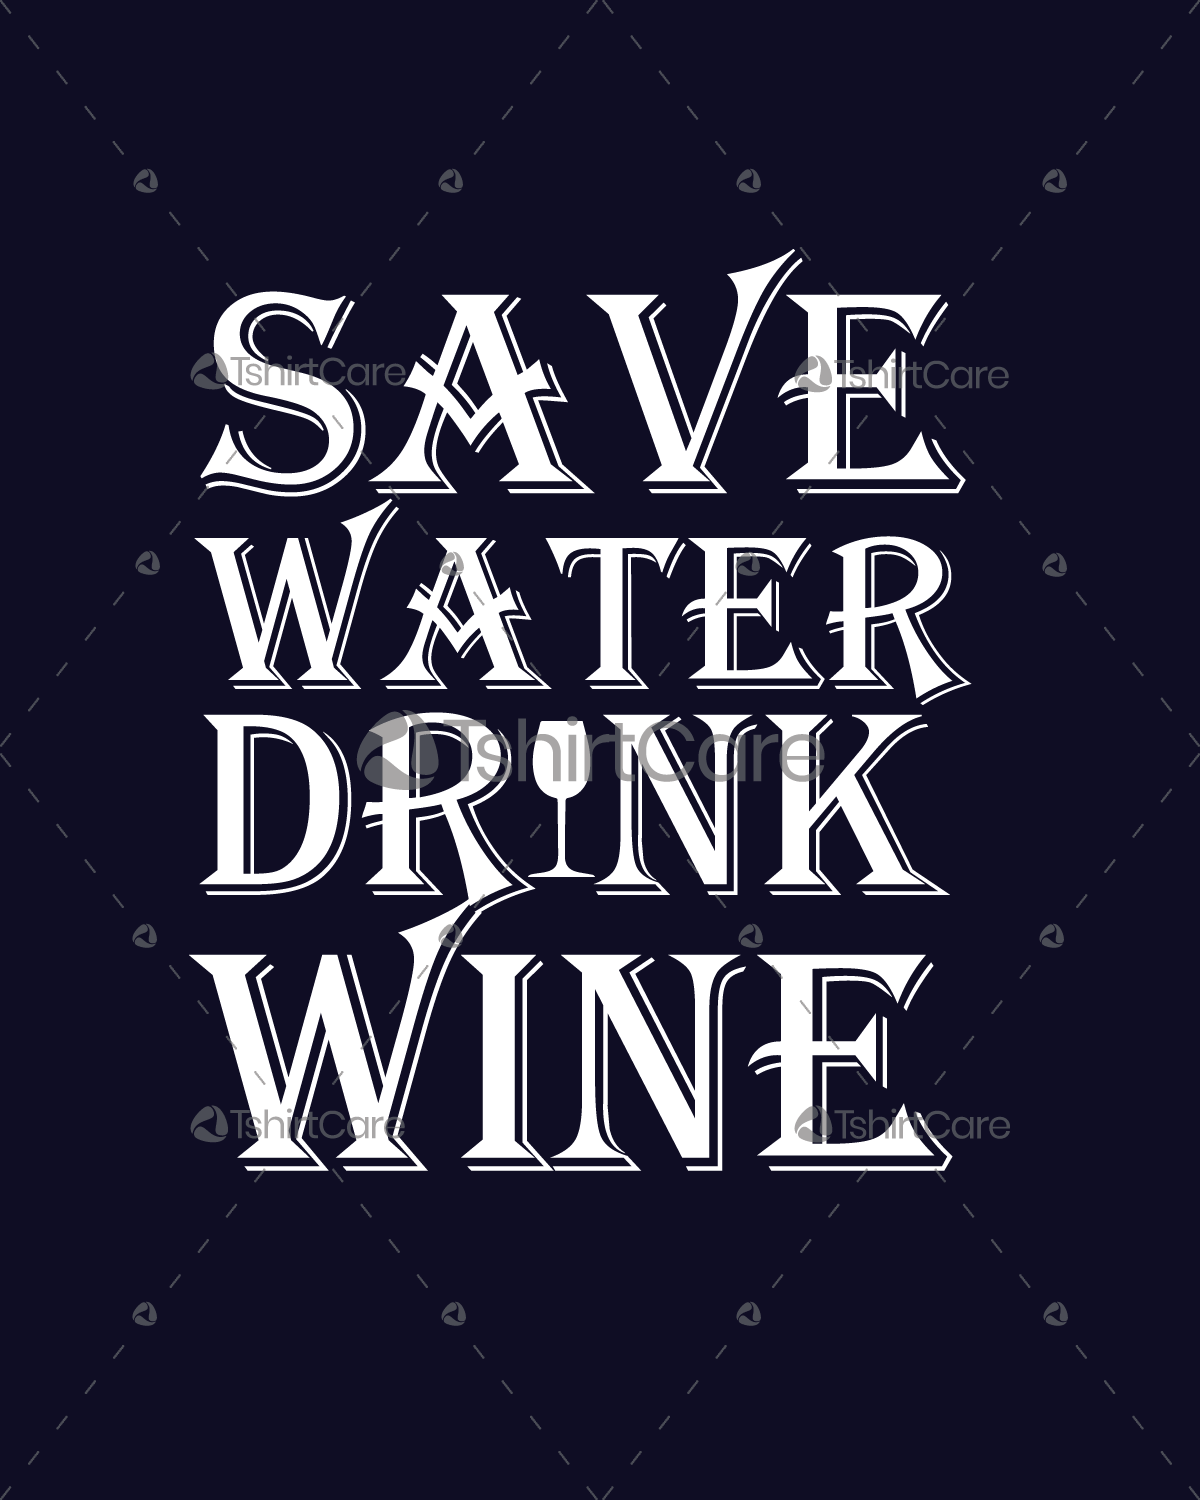 Save water drink wine graphics t shirt design funny design for event  shirts, hoodies - TshirtCare